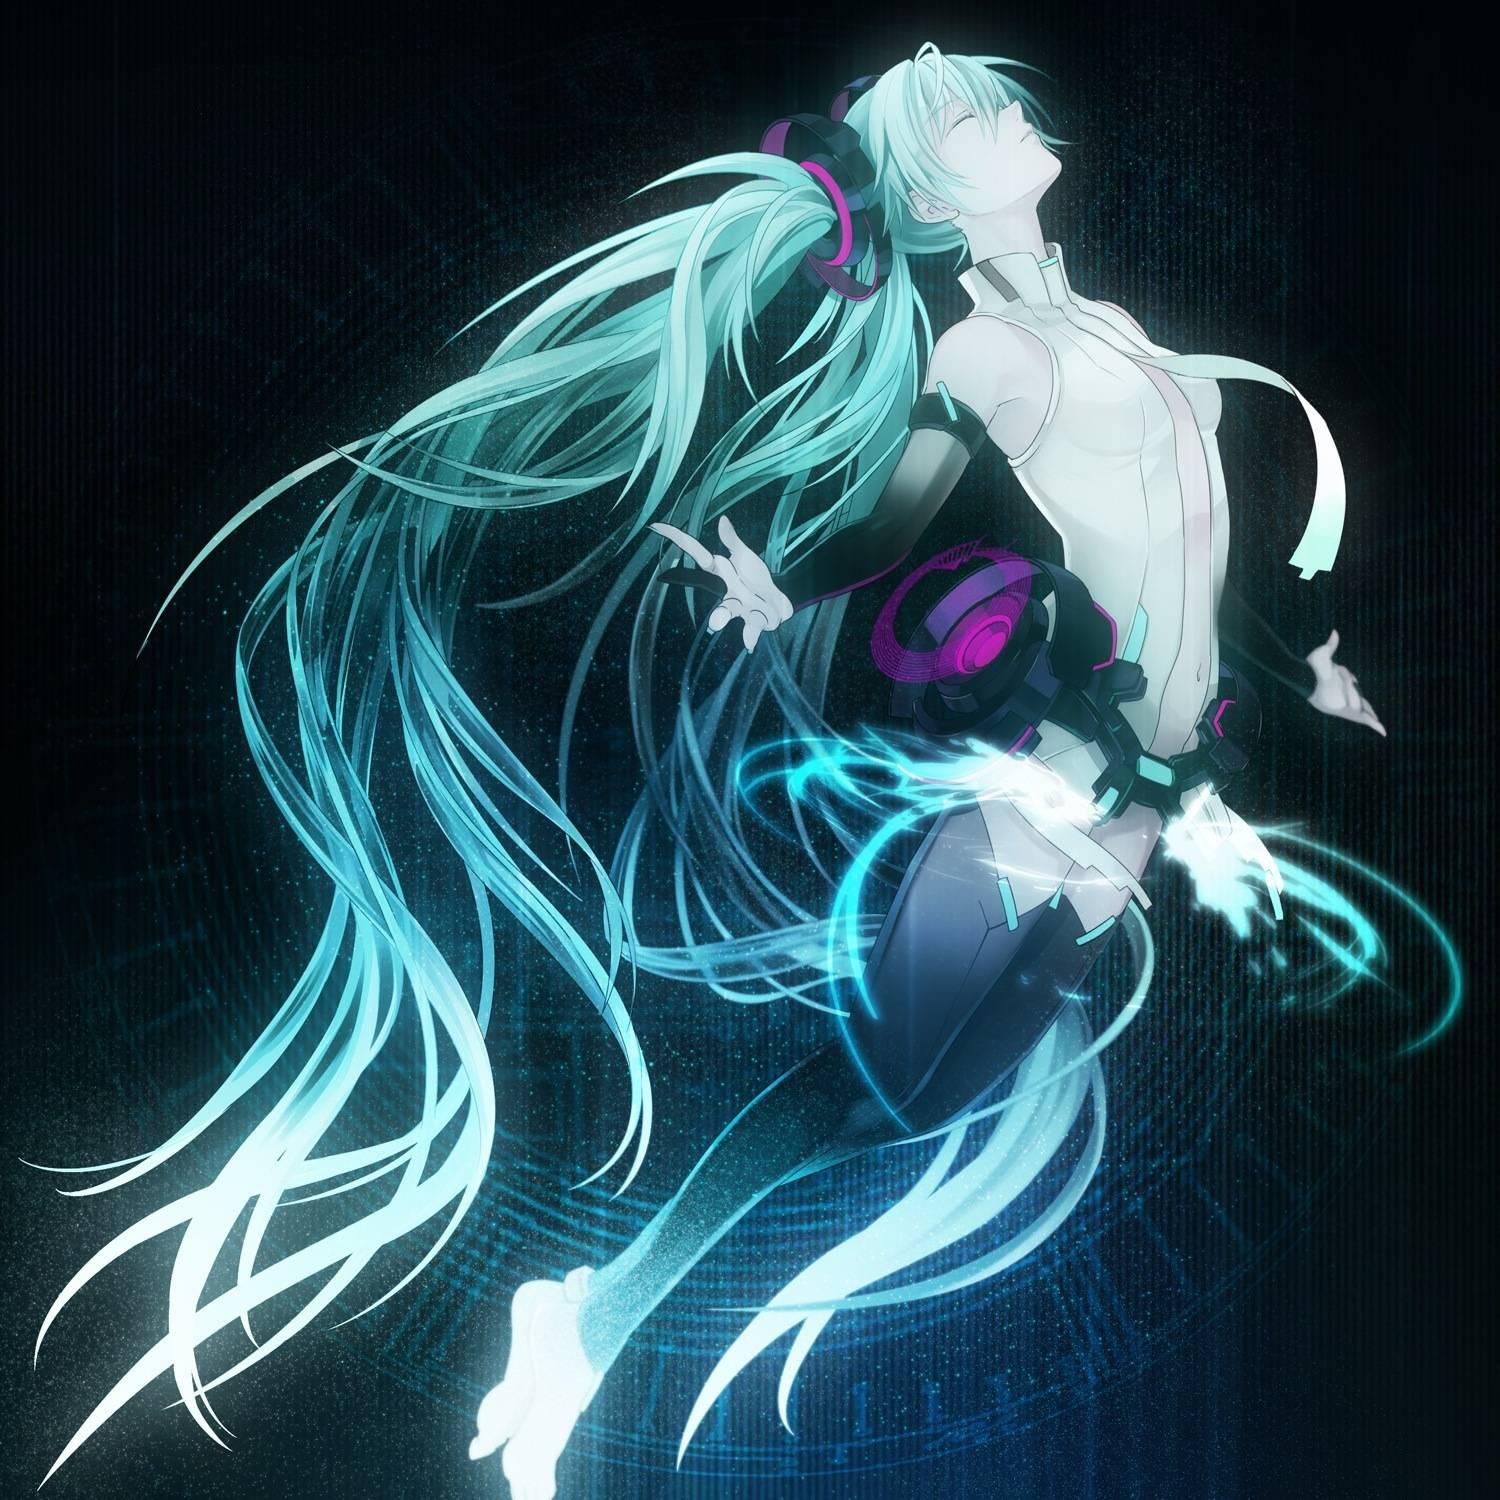 Miku's other, vocaloid's image summary. Vol. 3 8